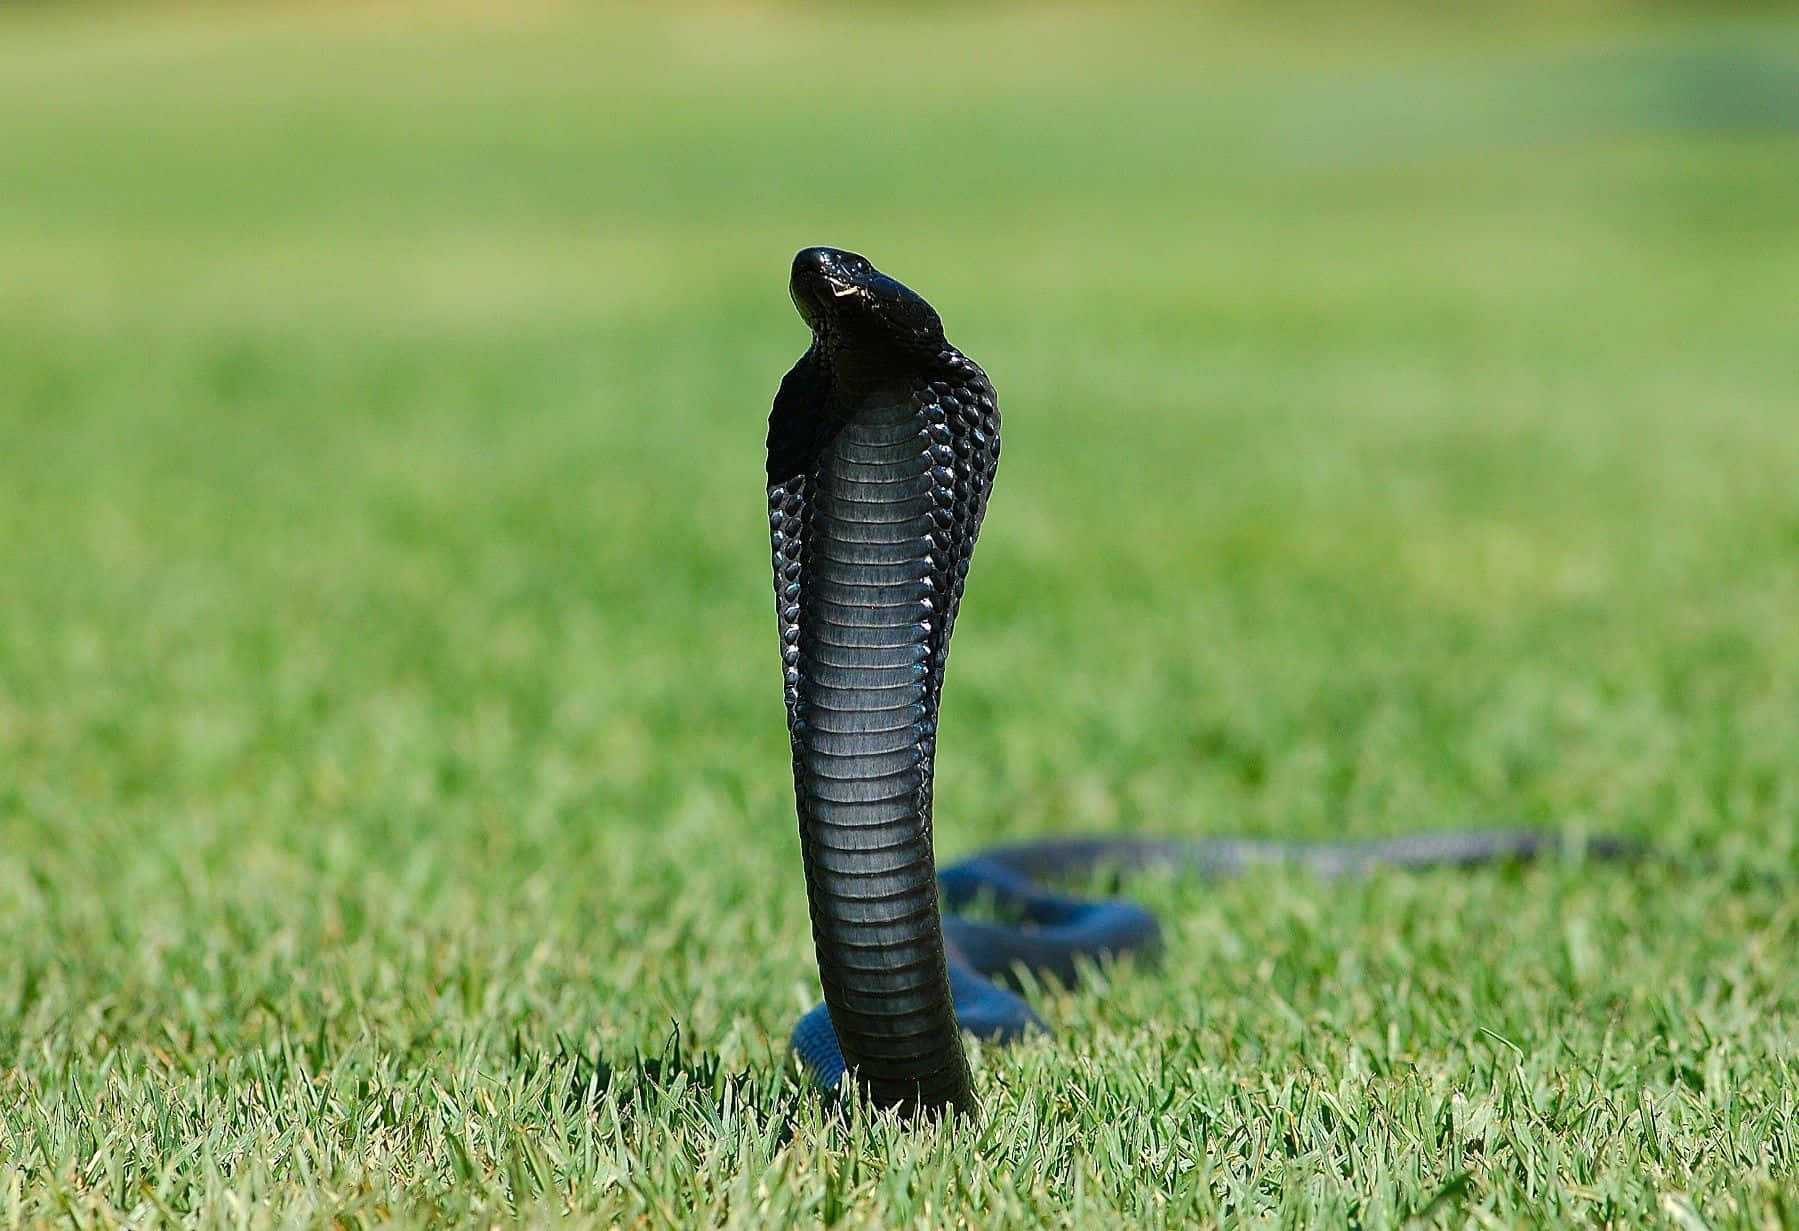 Up Close and Personal with a King Cobra